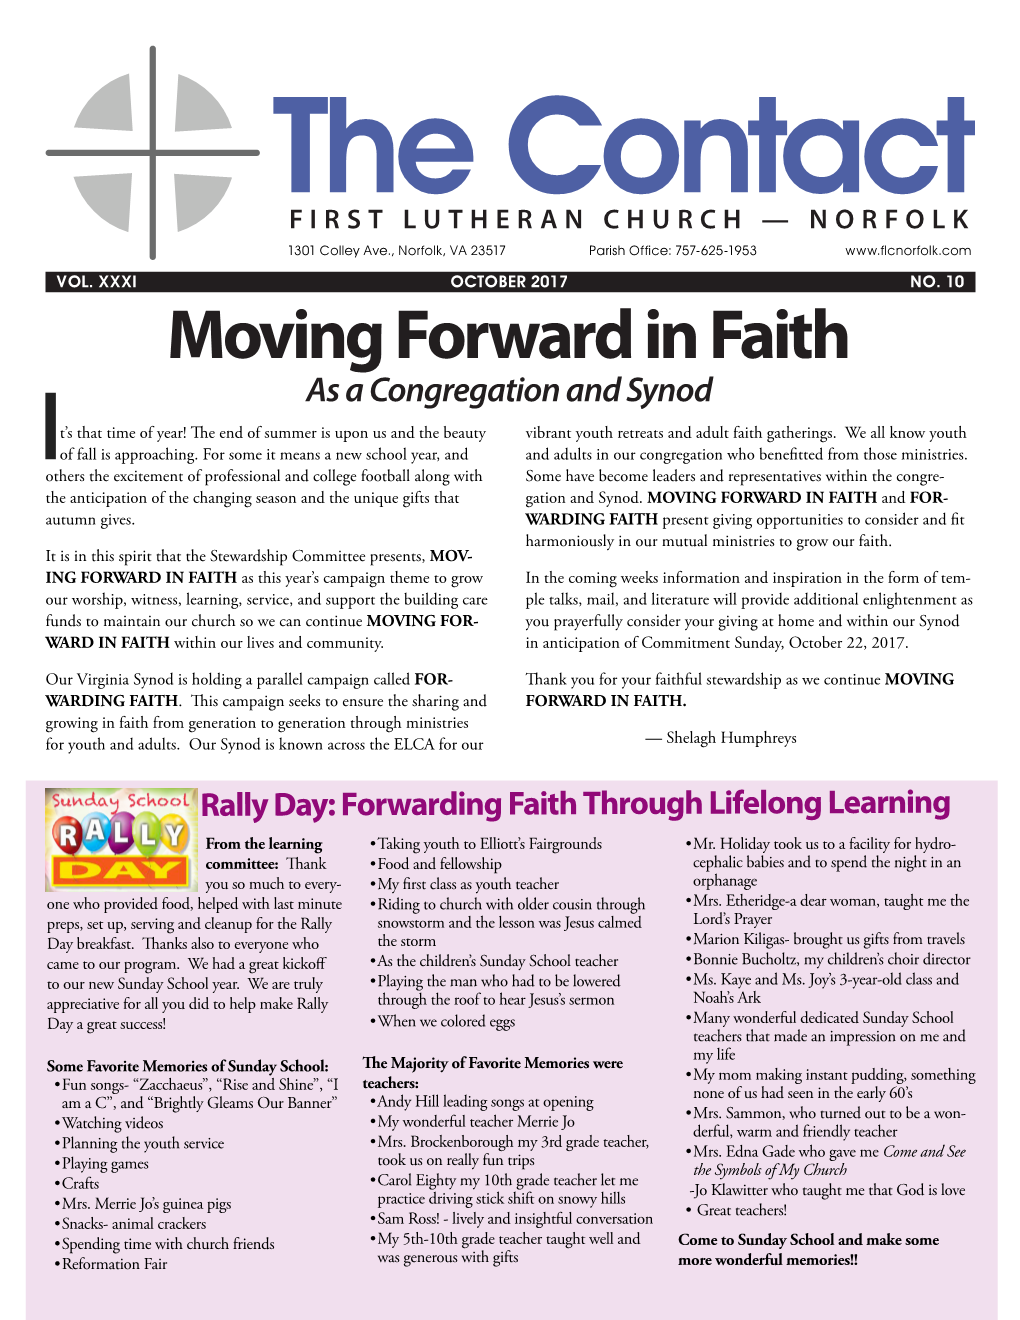 Moving Forward in Faith As a Congregation and Synod